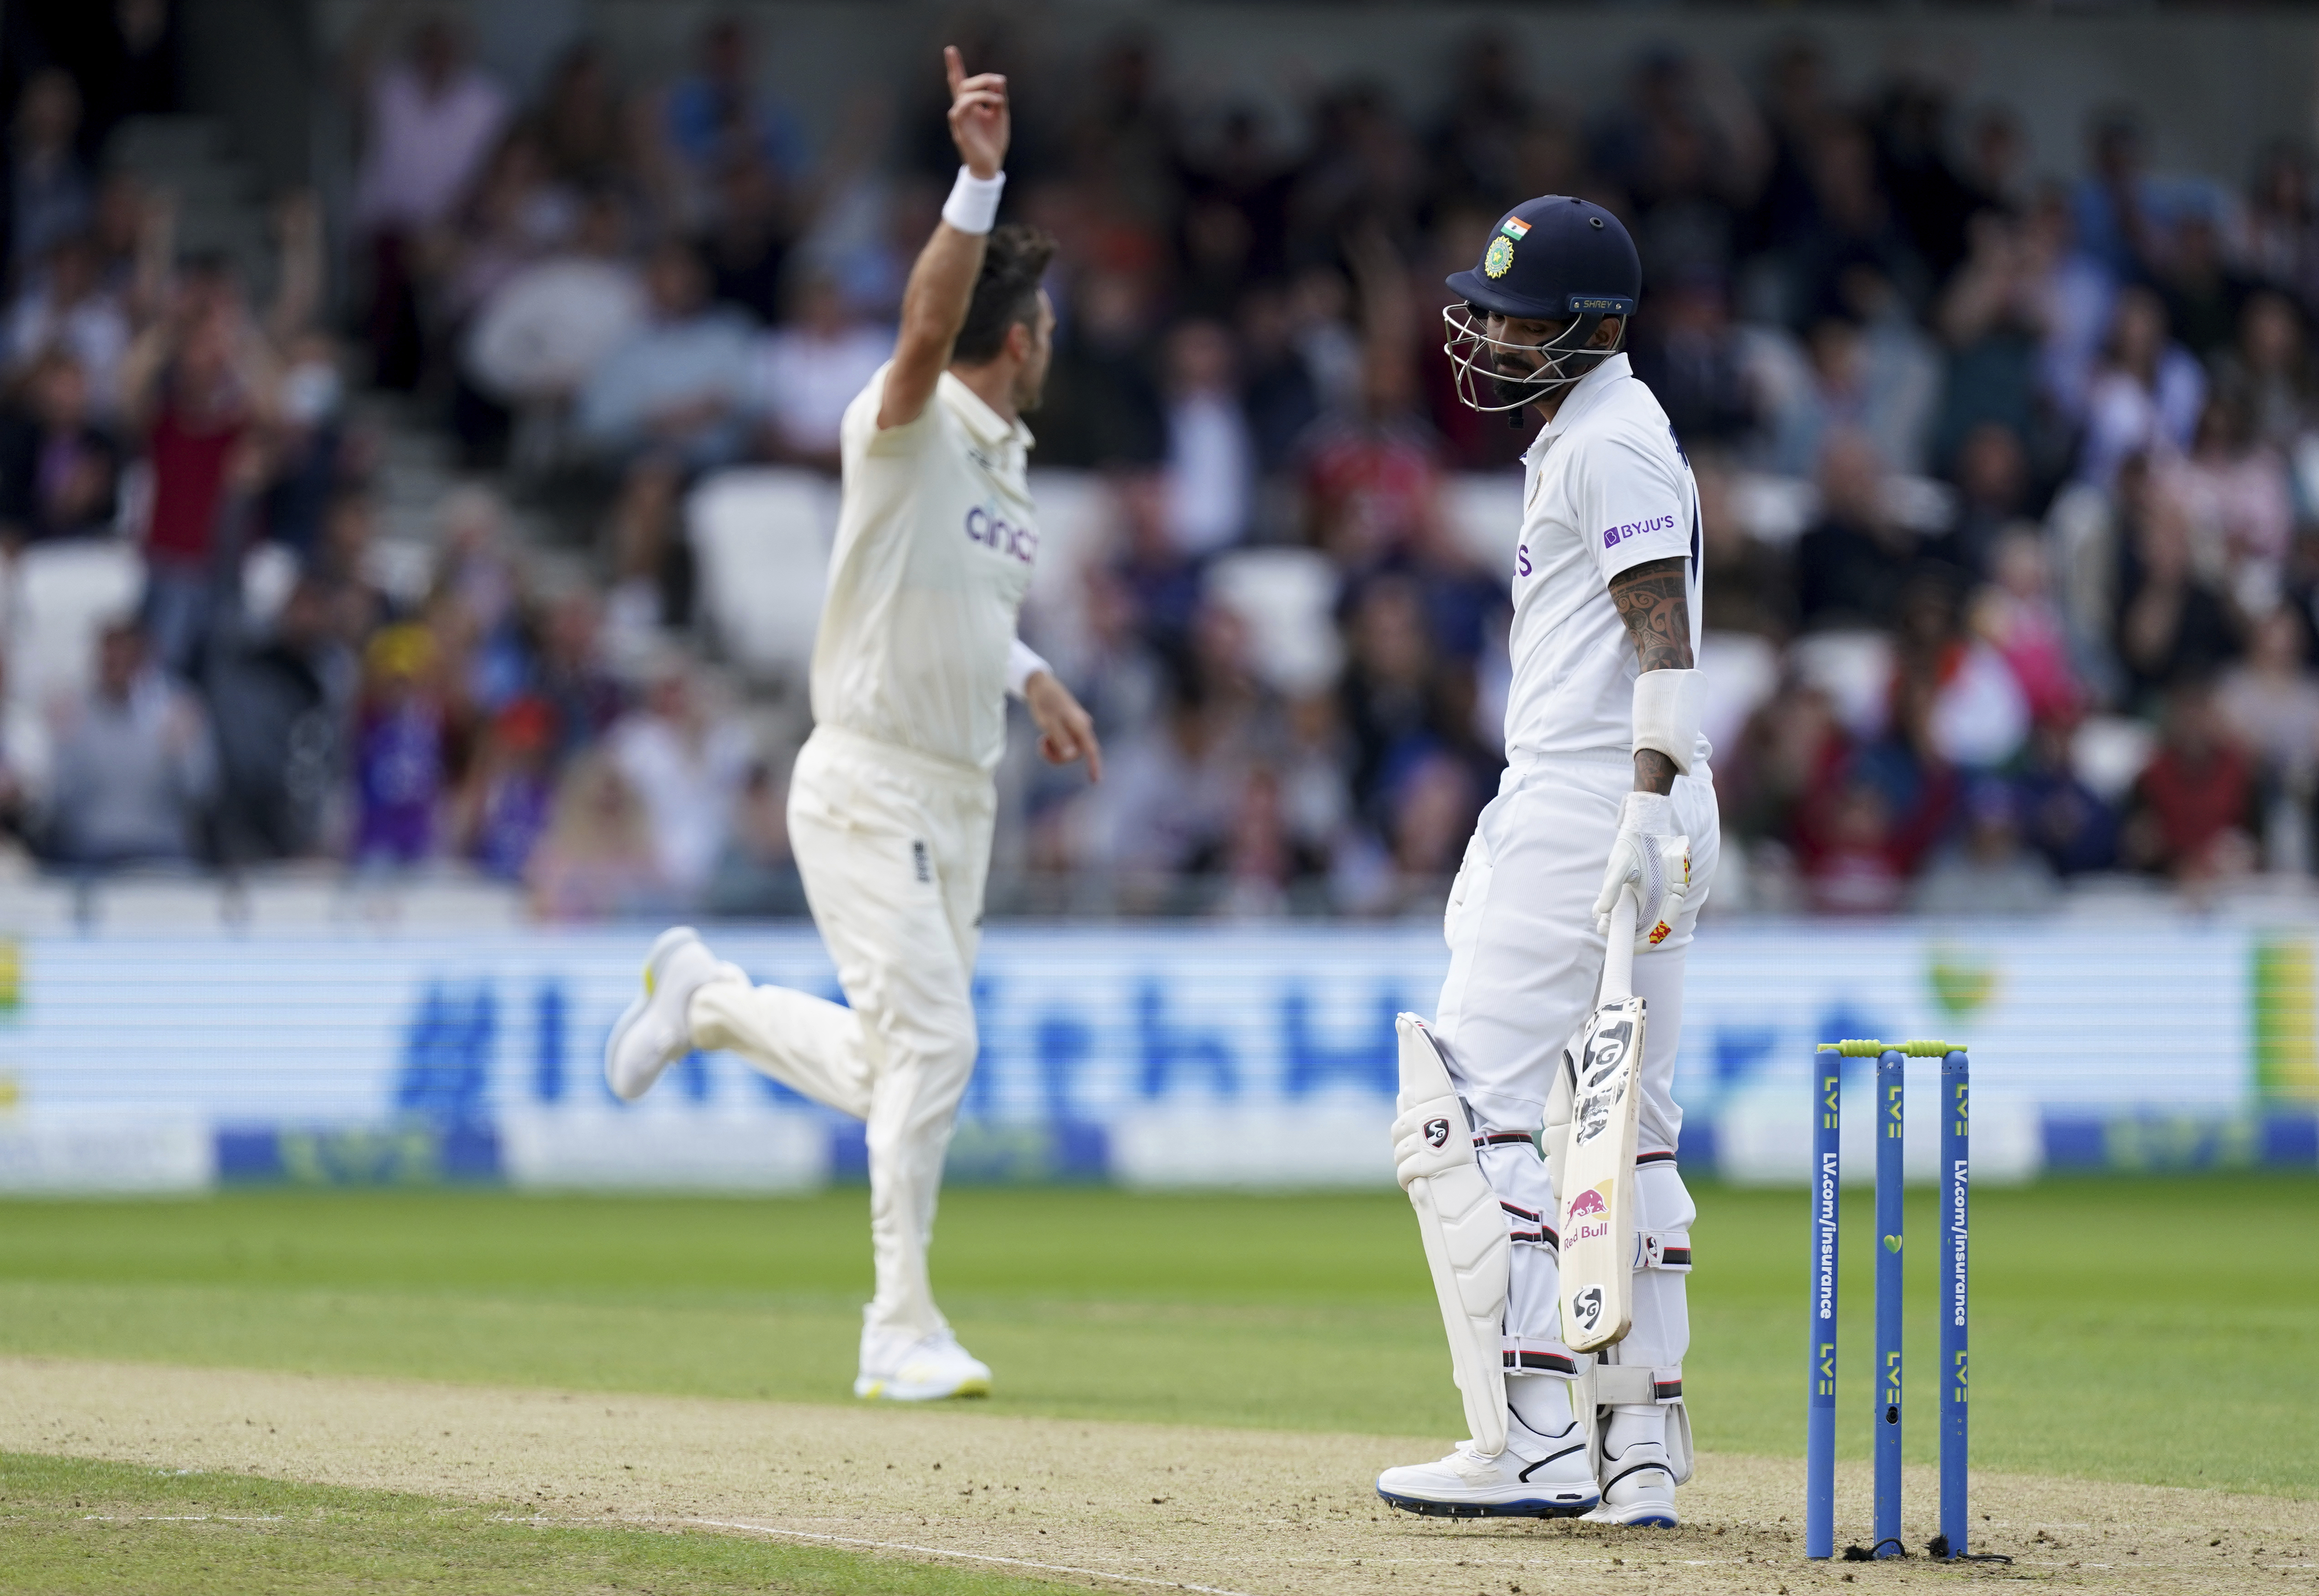 78 all out: England v India, Headingley Test review